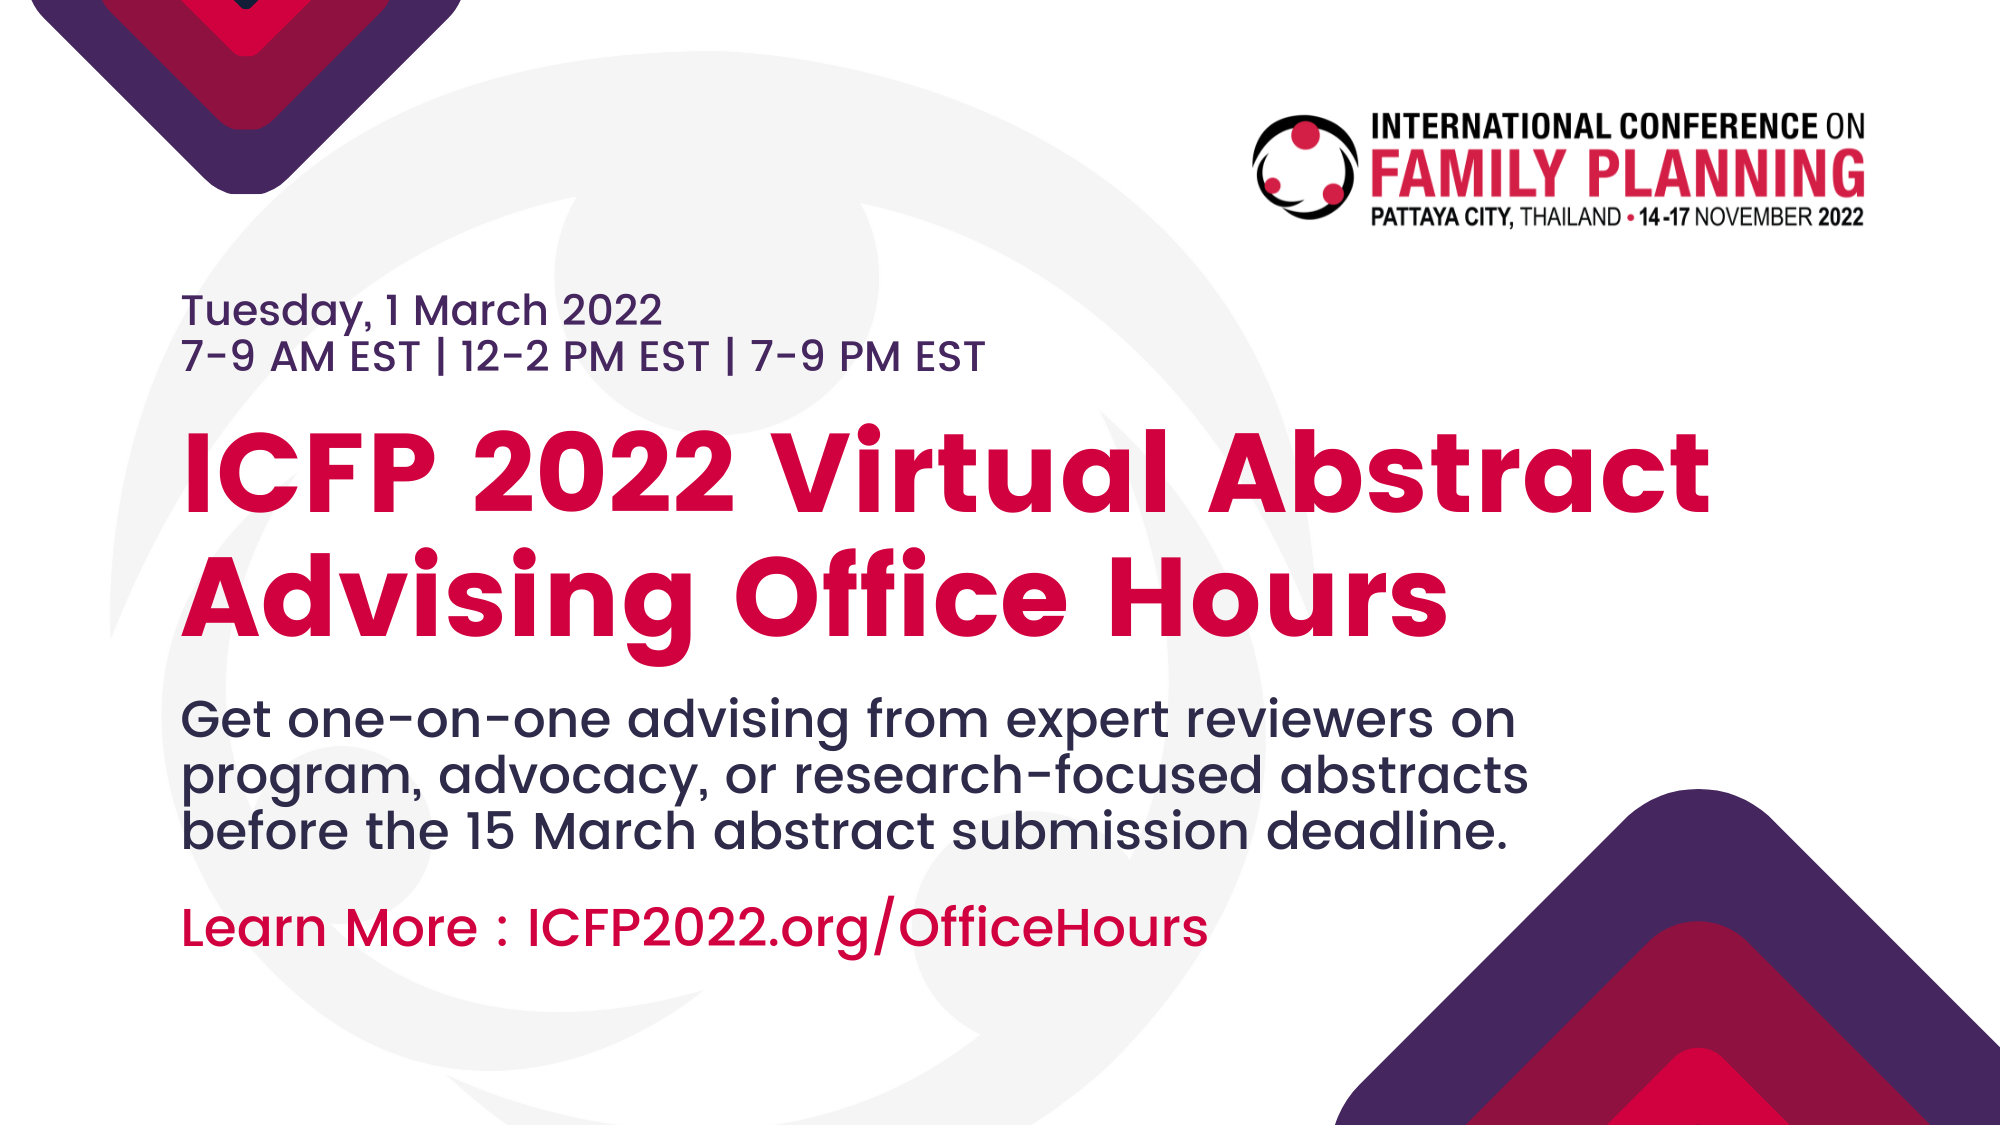 ICFP 2022 Virtual Abstract Advising Office Hours